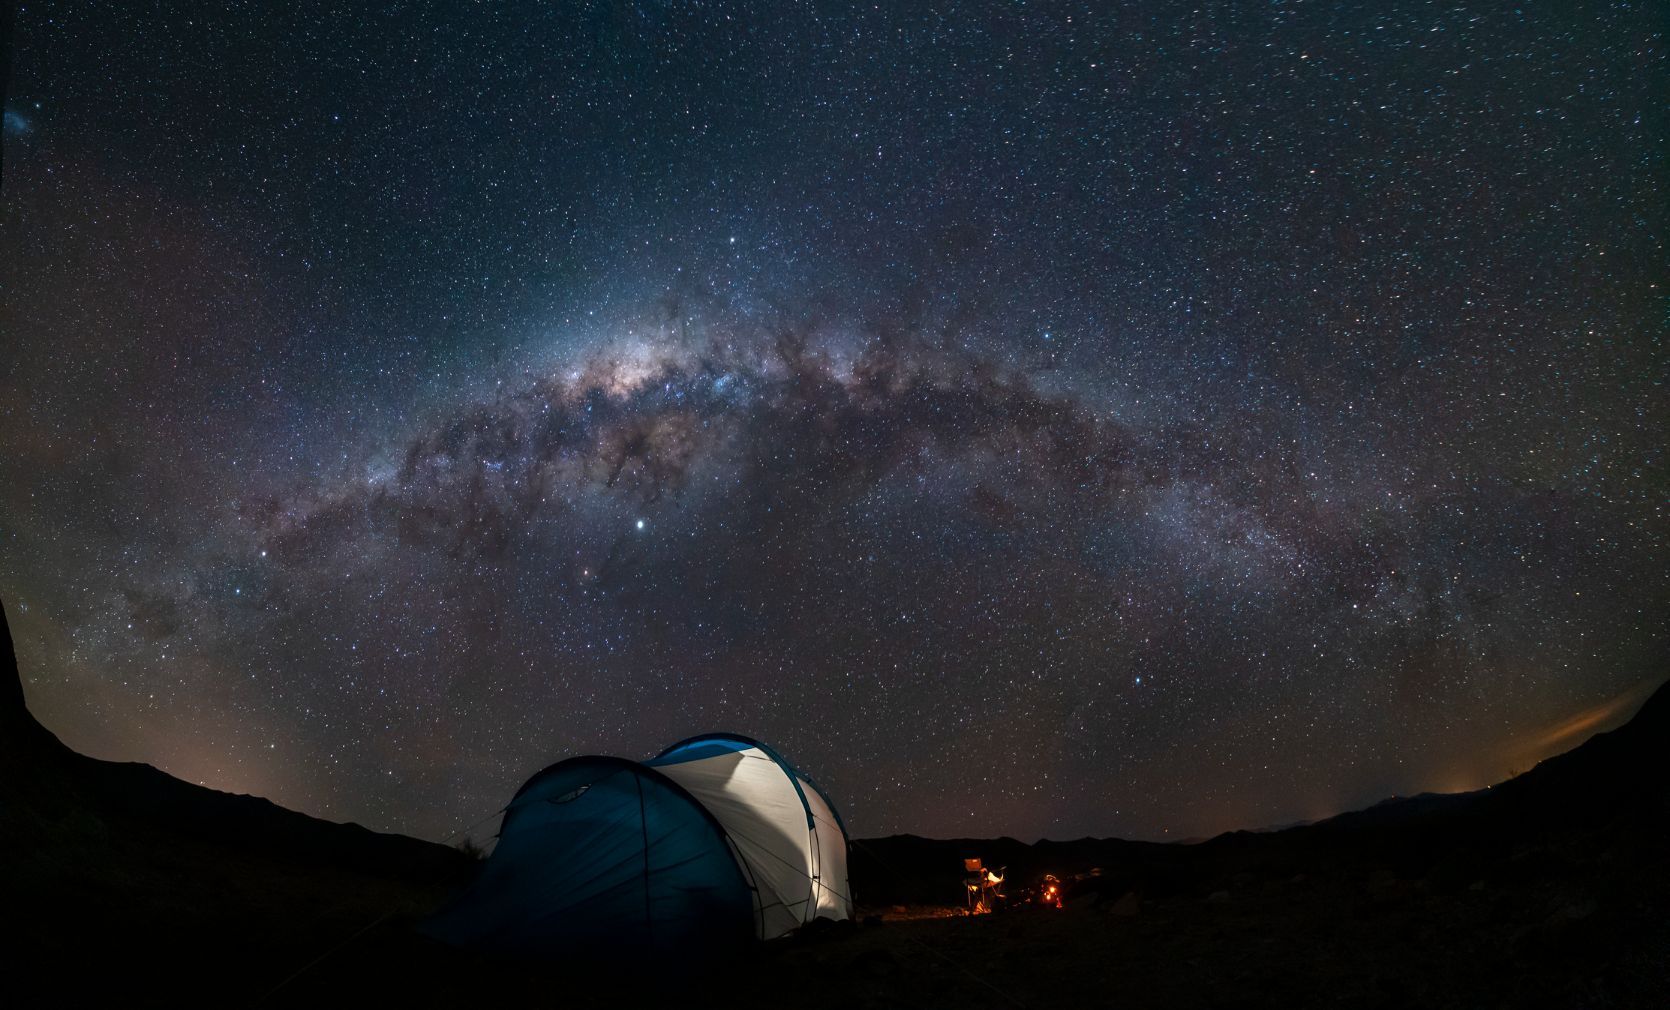 A tent below a starry sky. A photograph of wild camping.